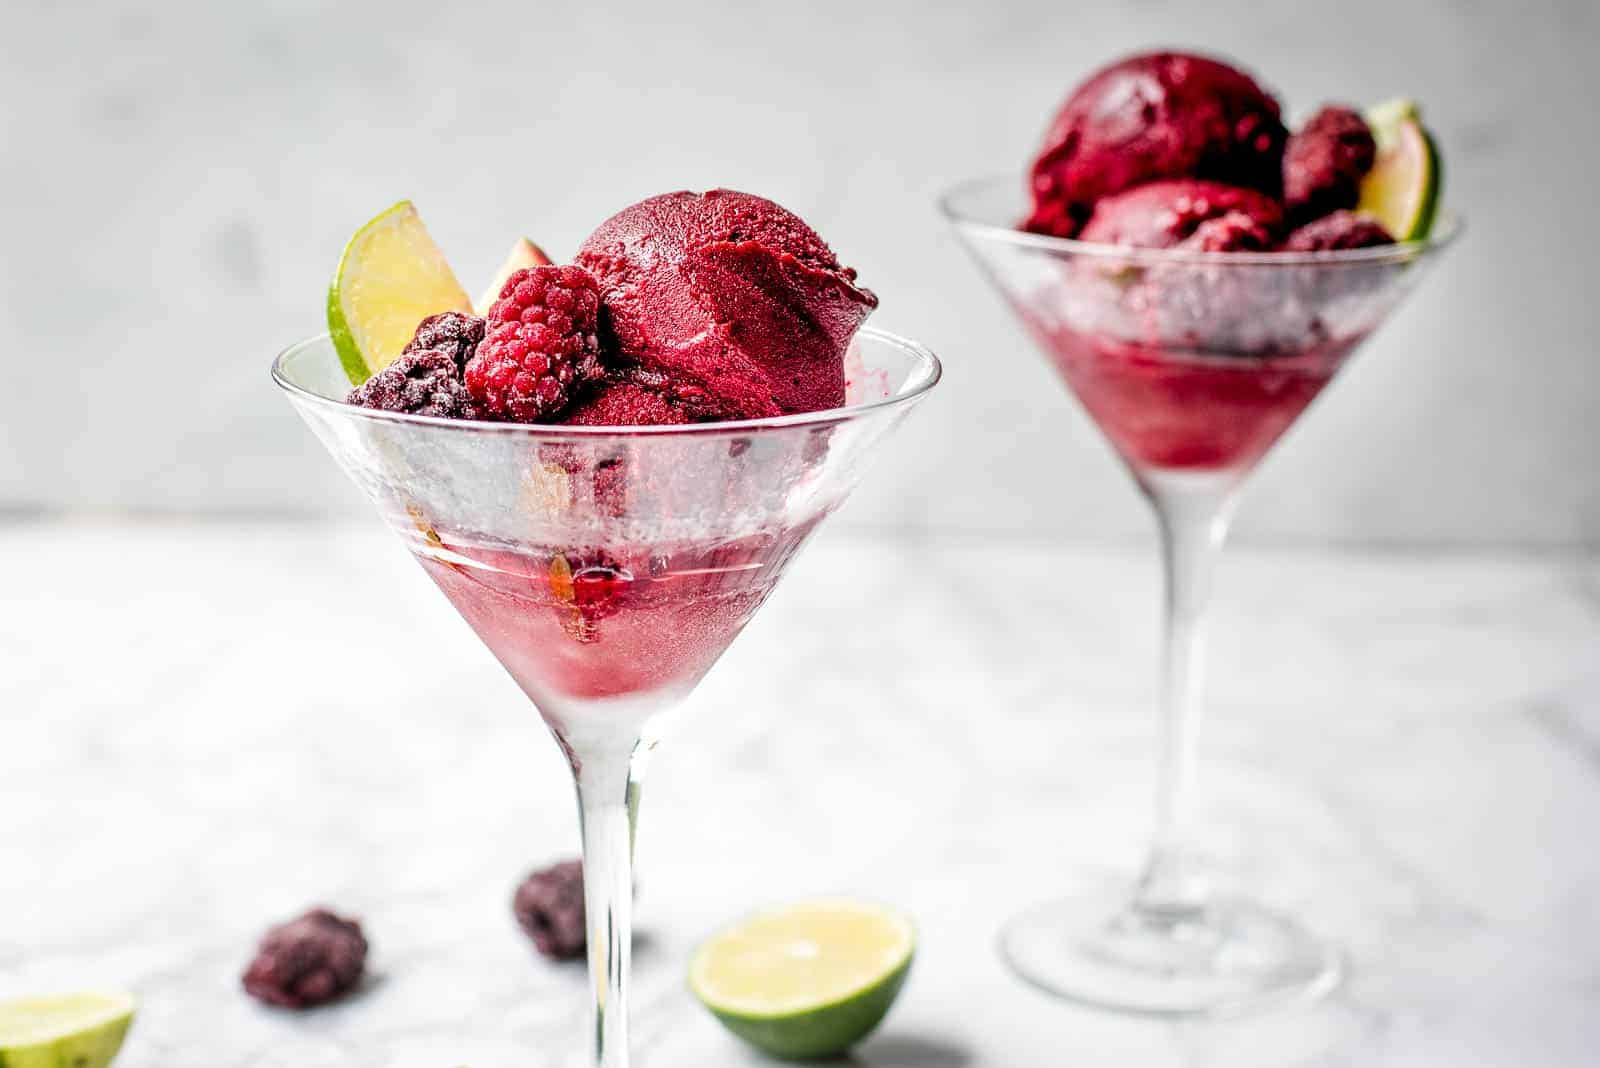 Horizontal image of blackberry lime sorbet in a metal loaf pan on a marble background garnished with frozen blackberries and limes.